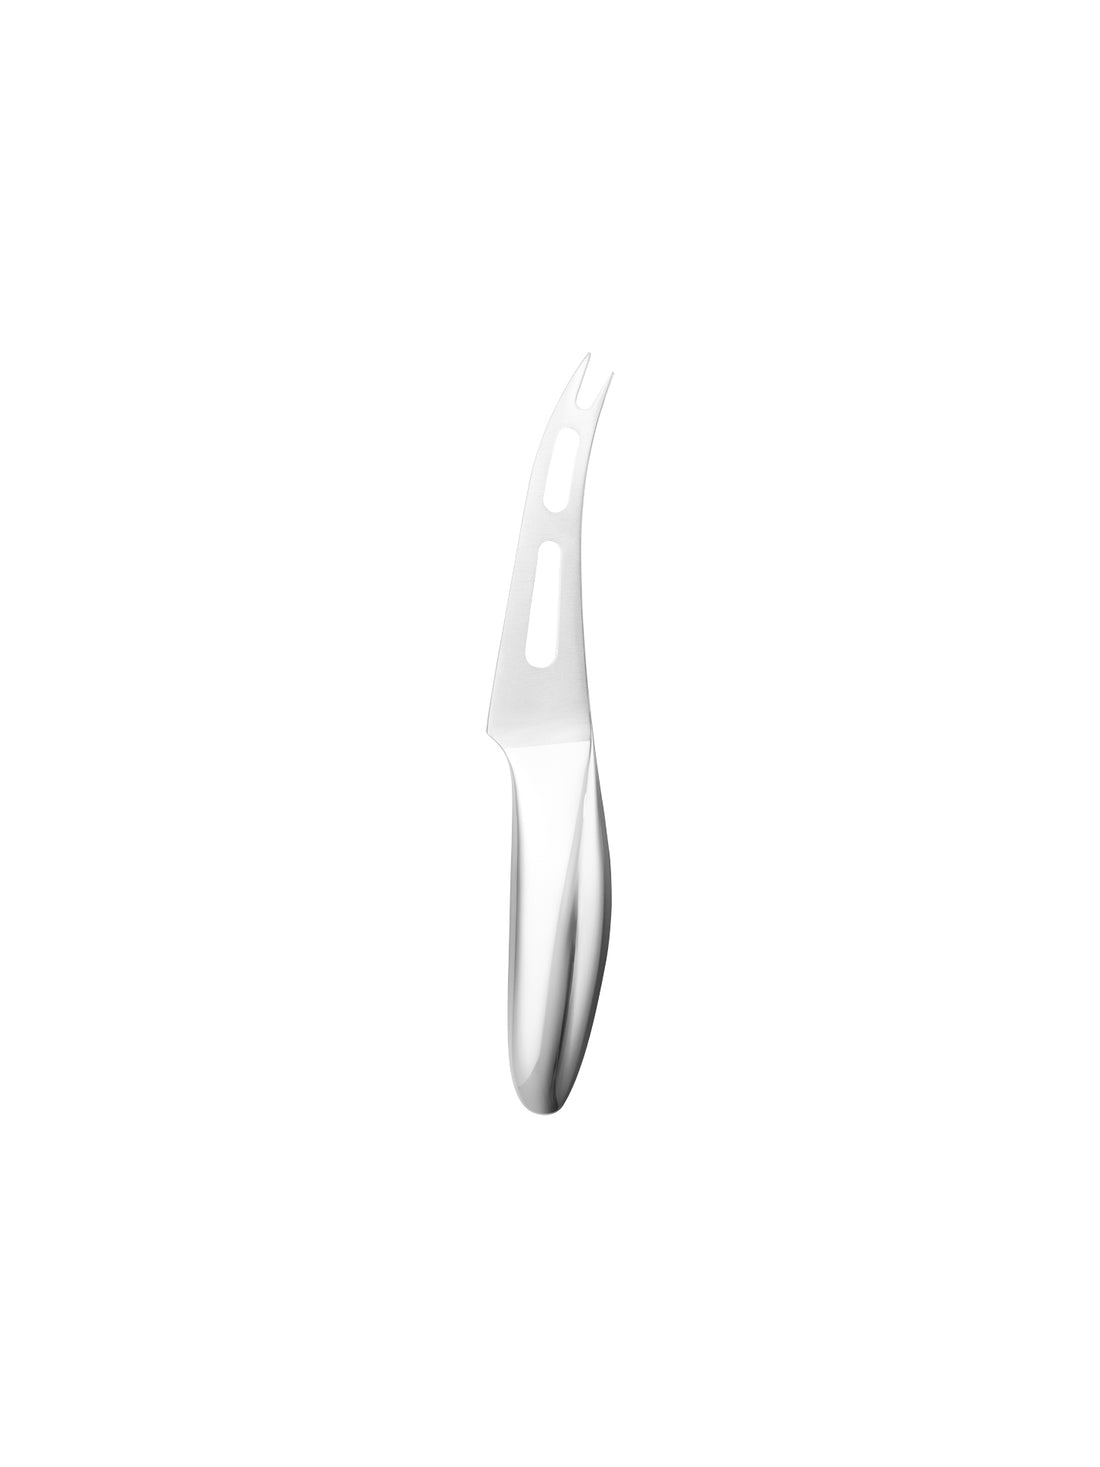 Design cheese knife, stainless steel